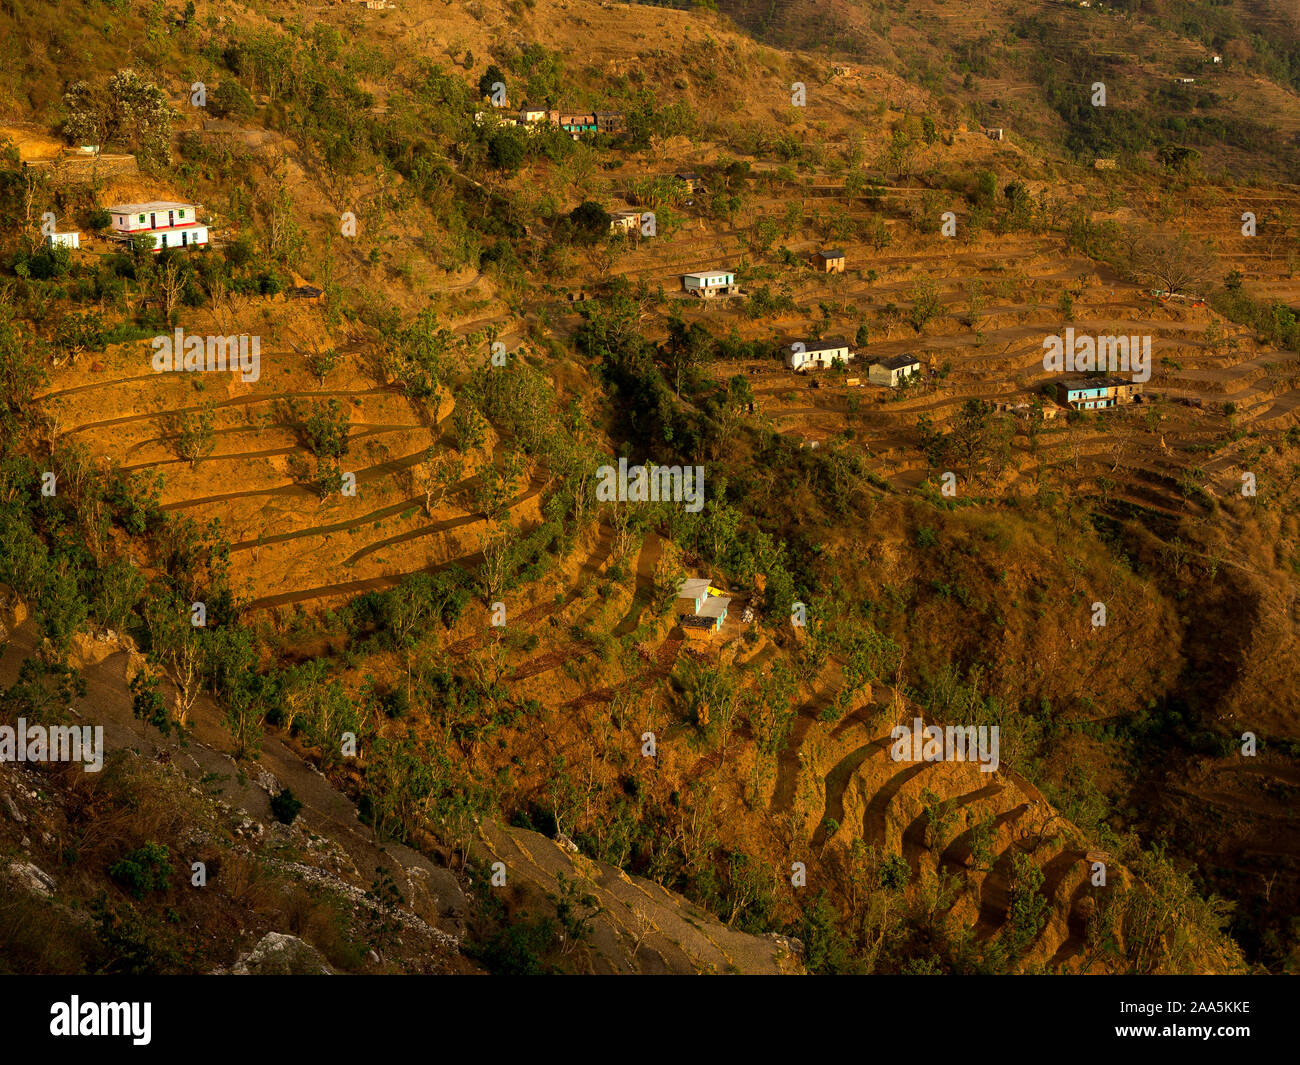 Remote village surrounded by extensive terraced fields on the Nandhour Valley, Kumaon Hills, Uttarakhand, India Stock Photo